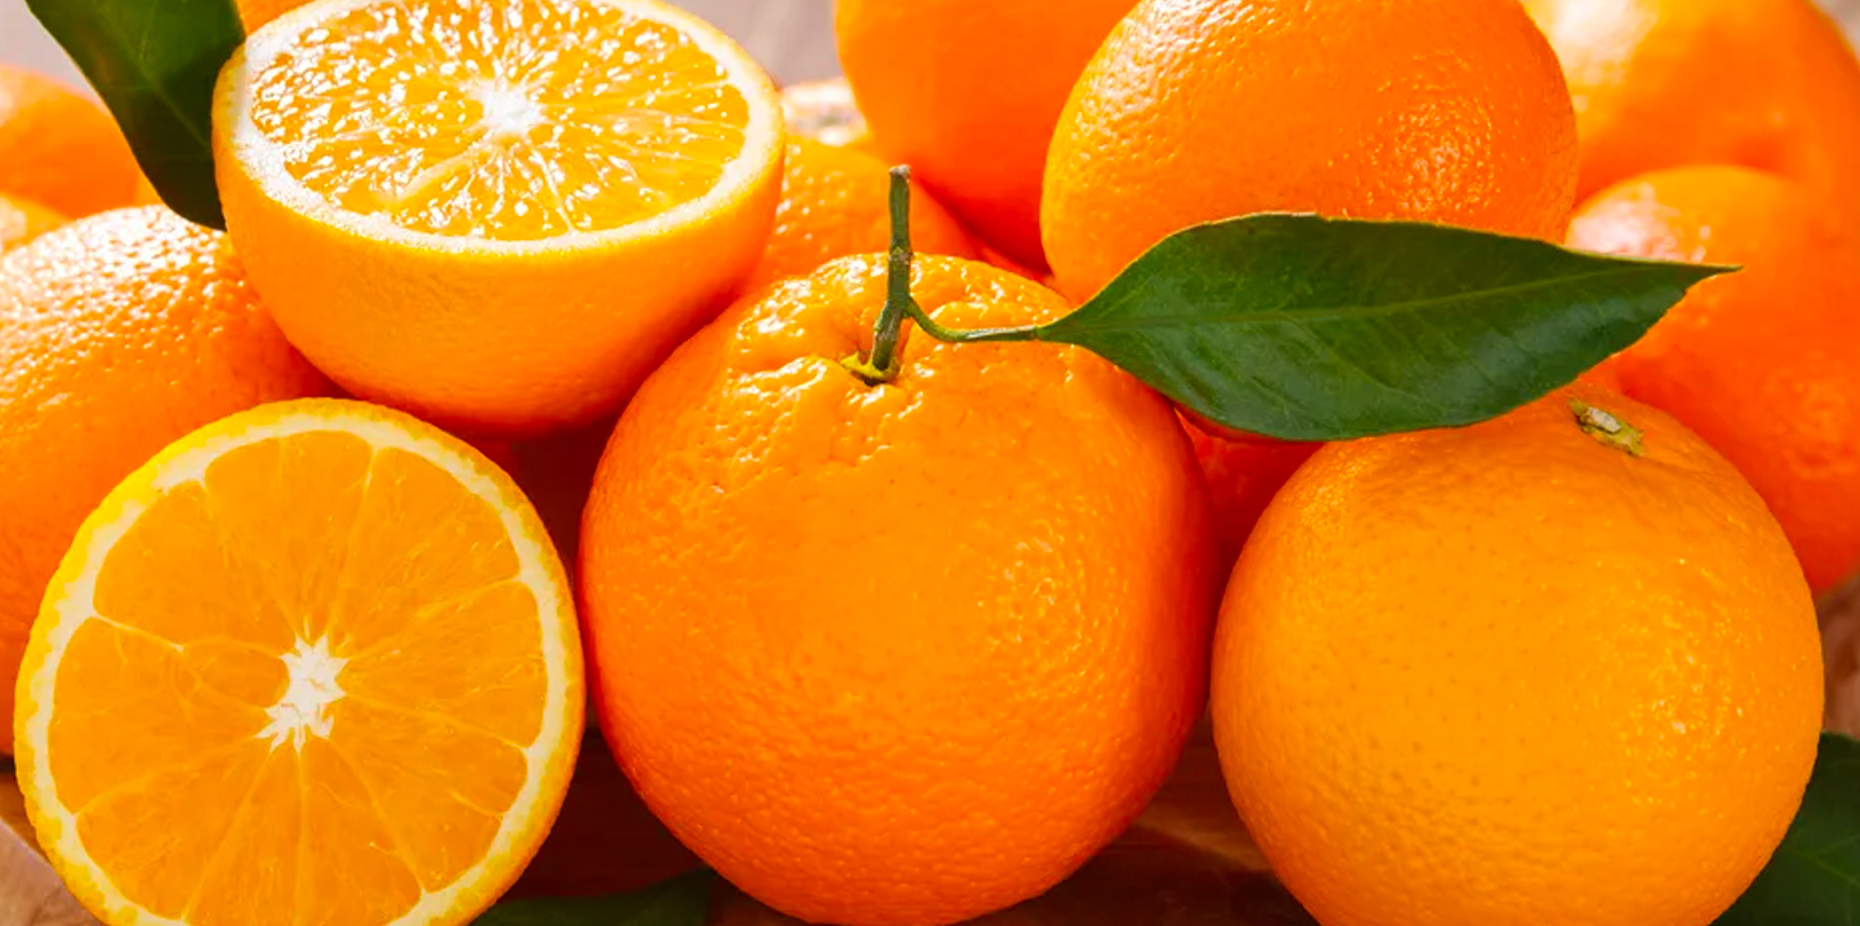 Orange: Facts, Nutrition, Benefits, and More